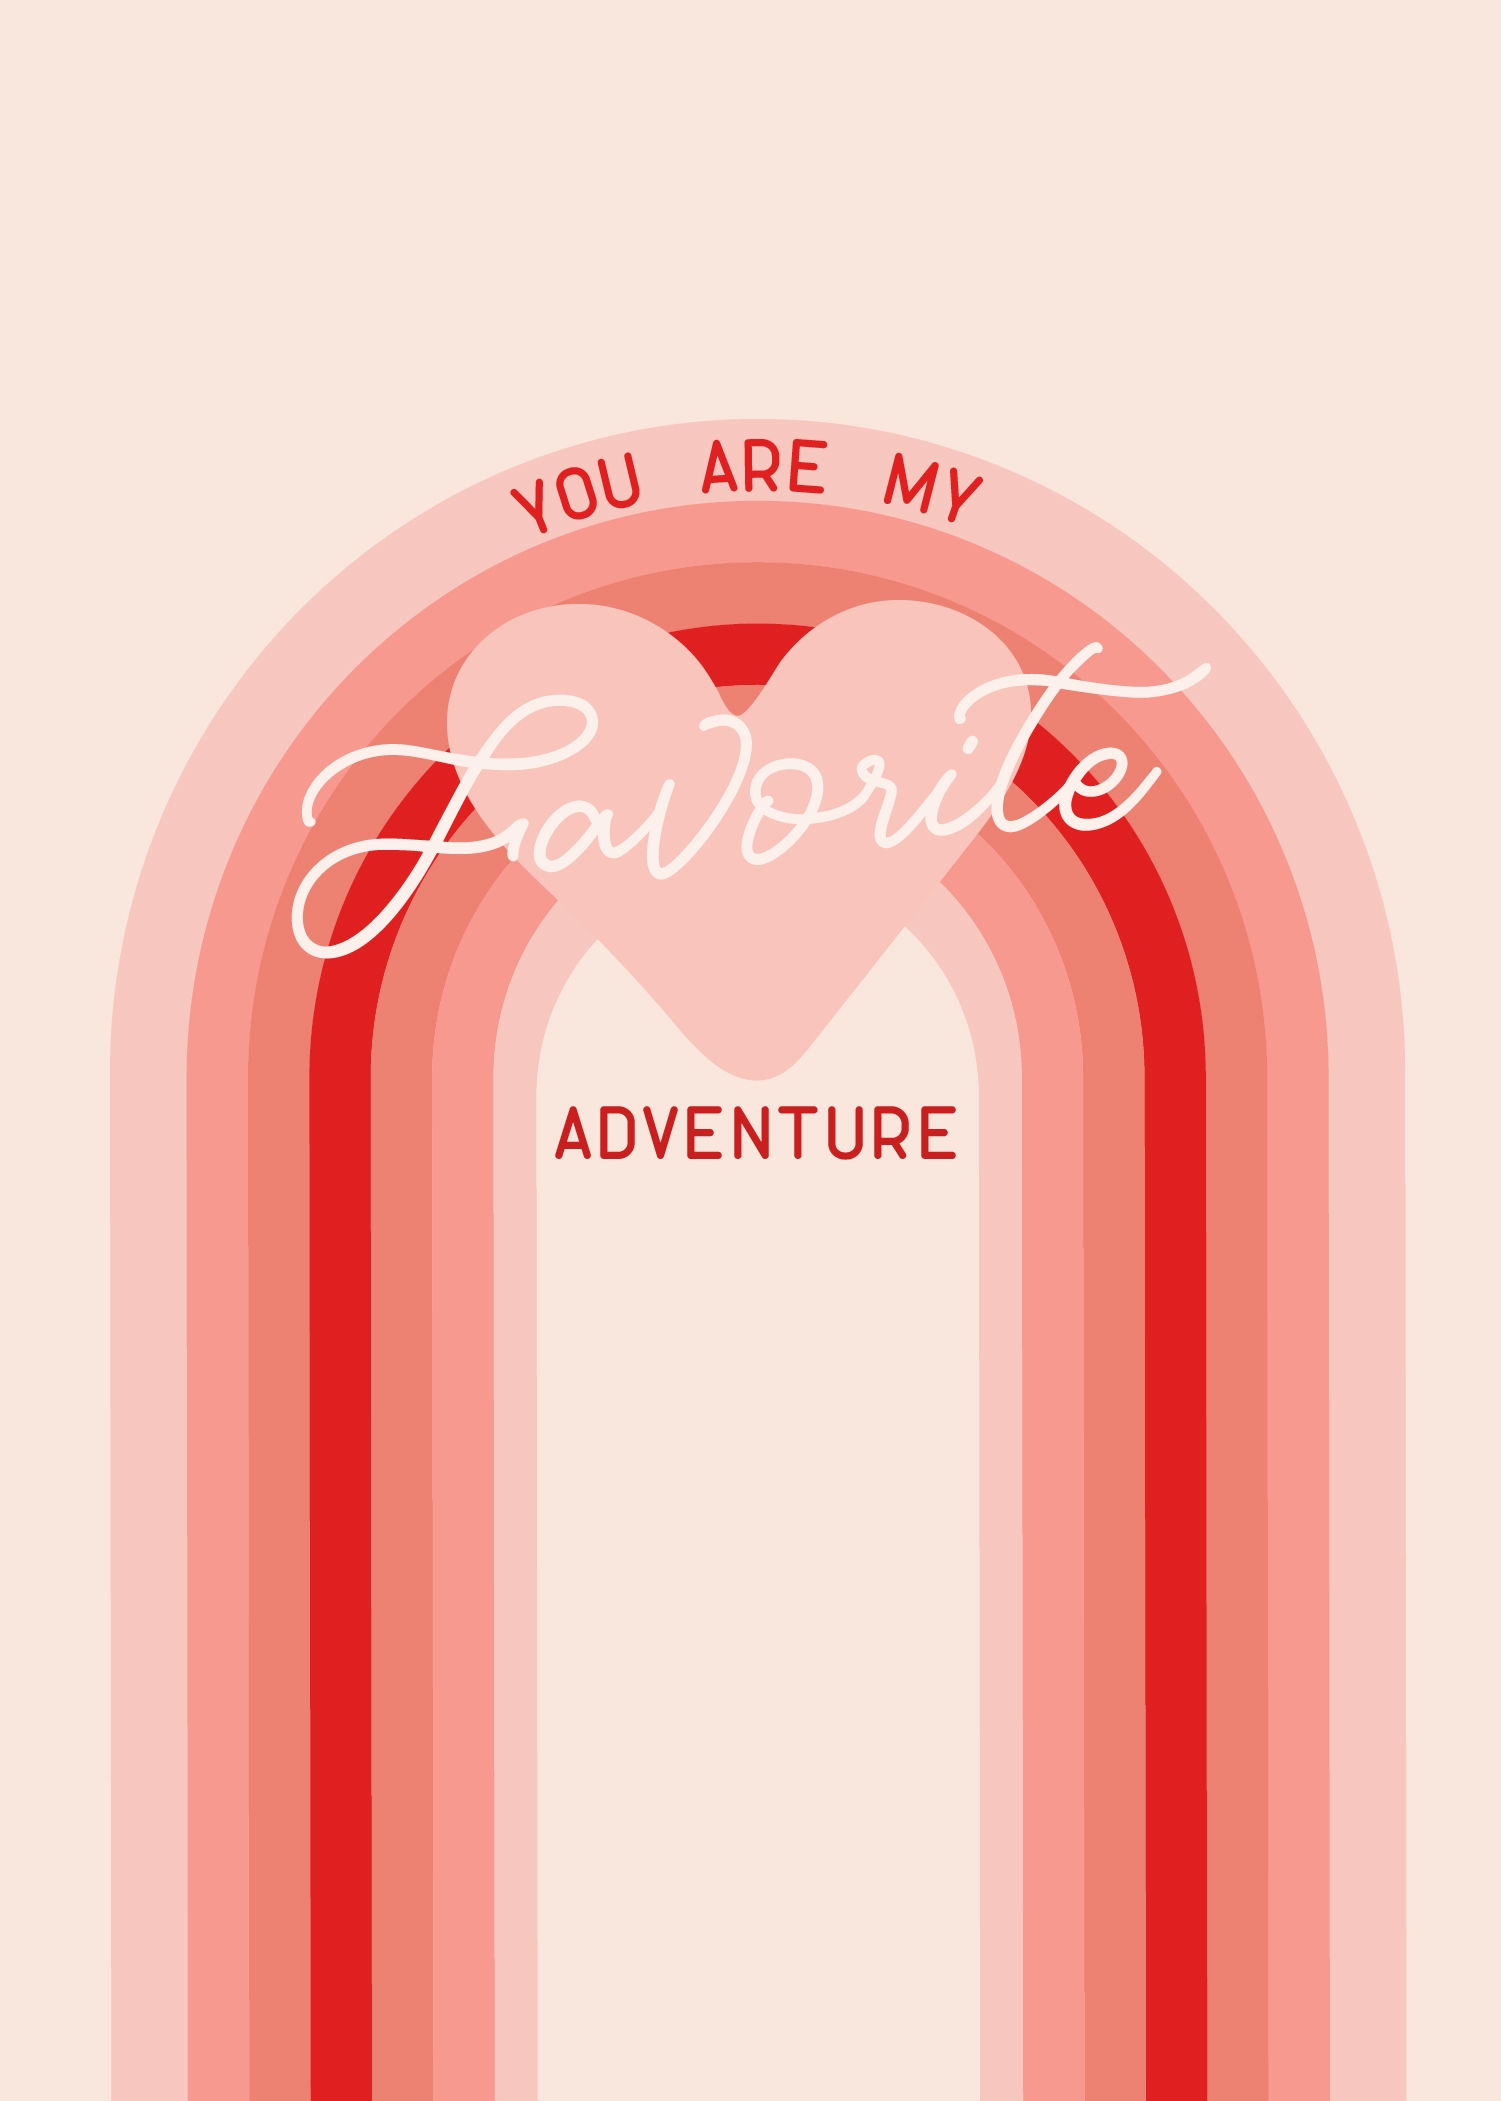 you are my favorite adventure